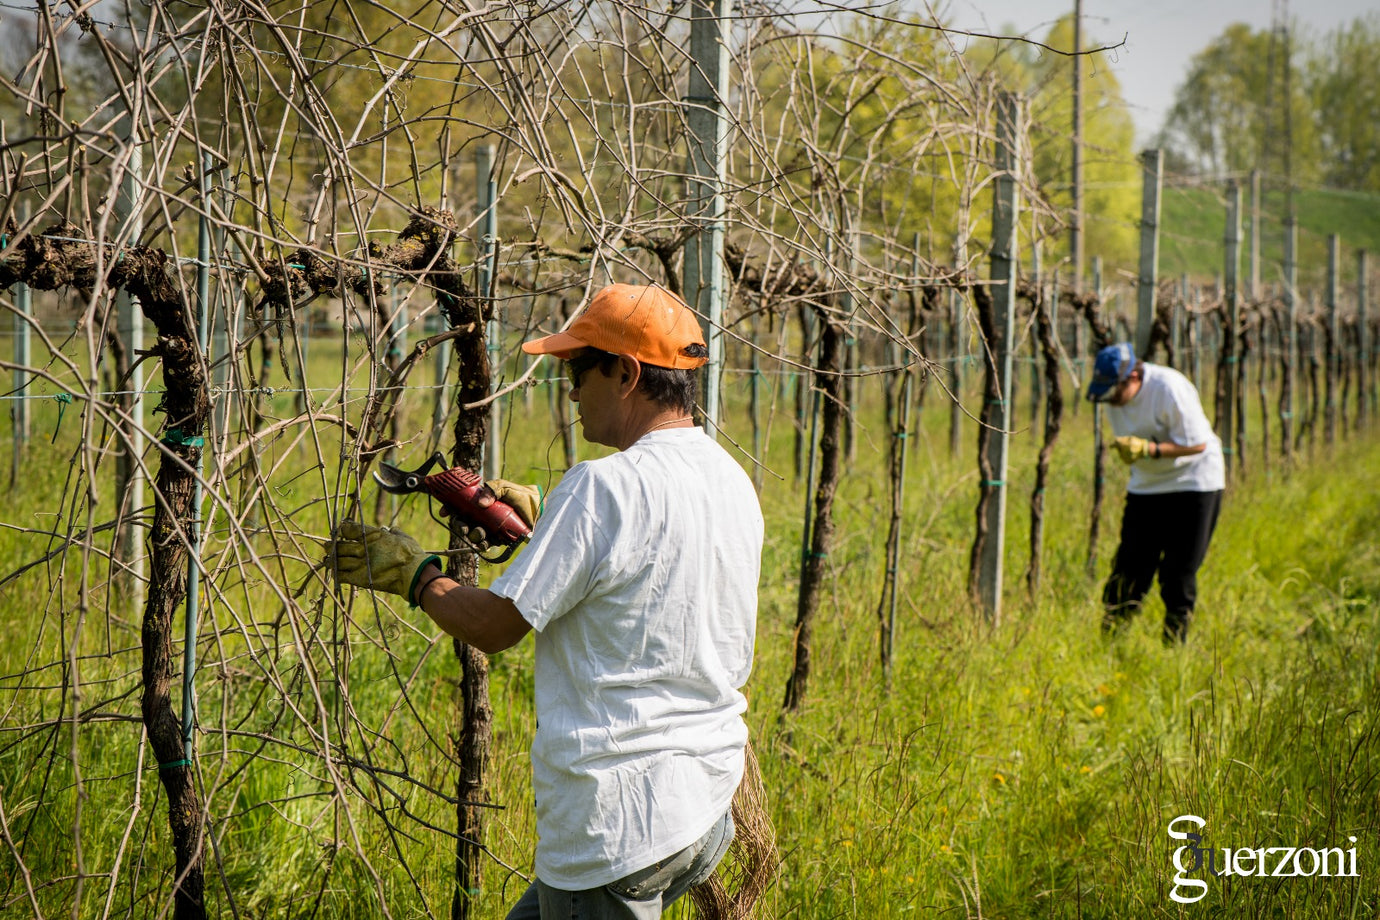 Winter Pruning in the Vineyard: A Key Operation